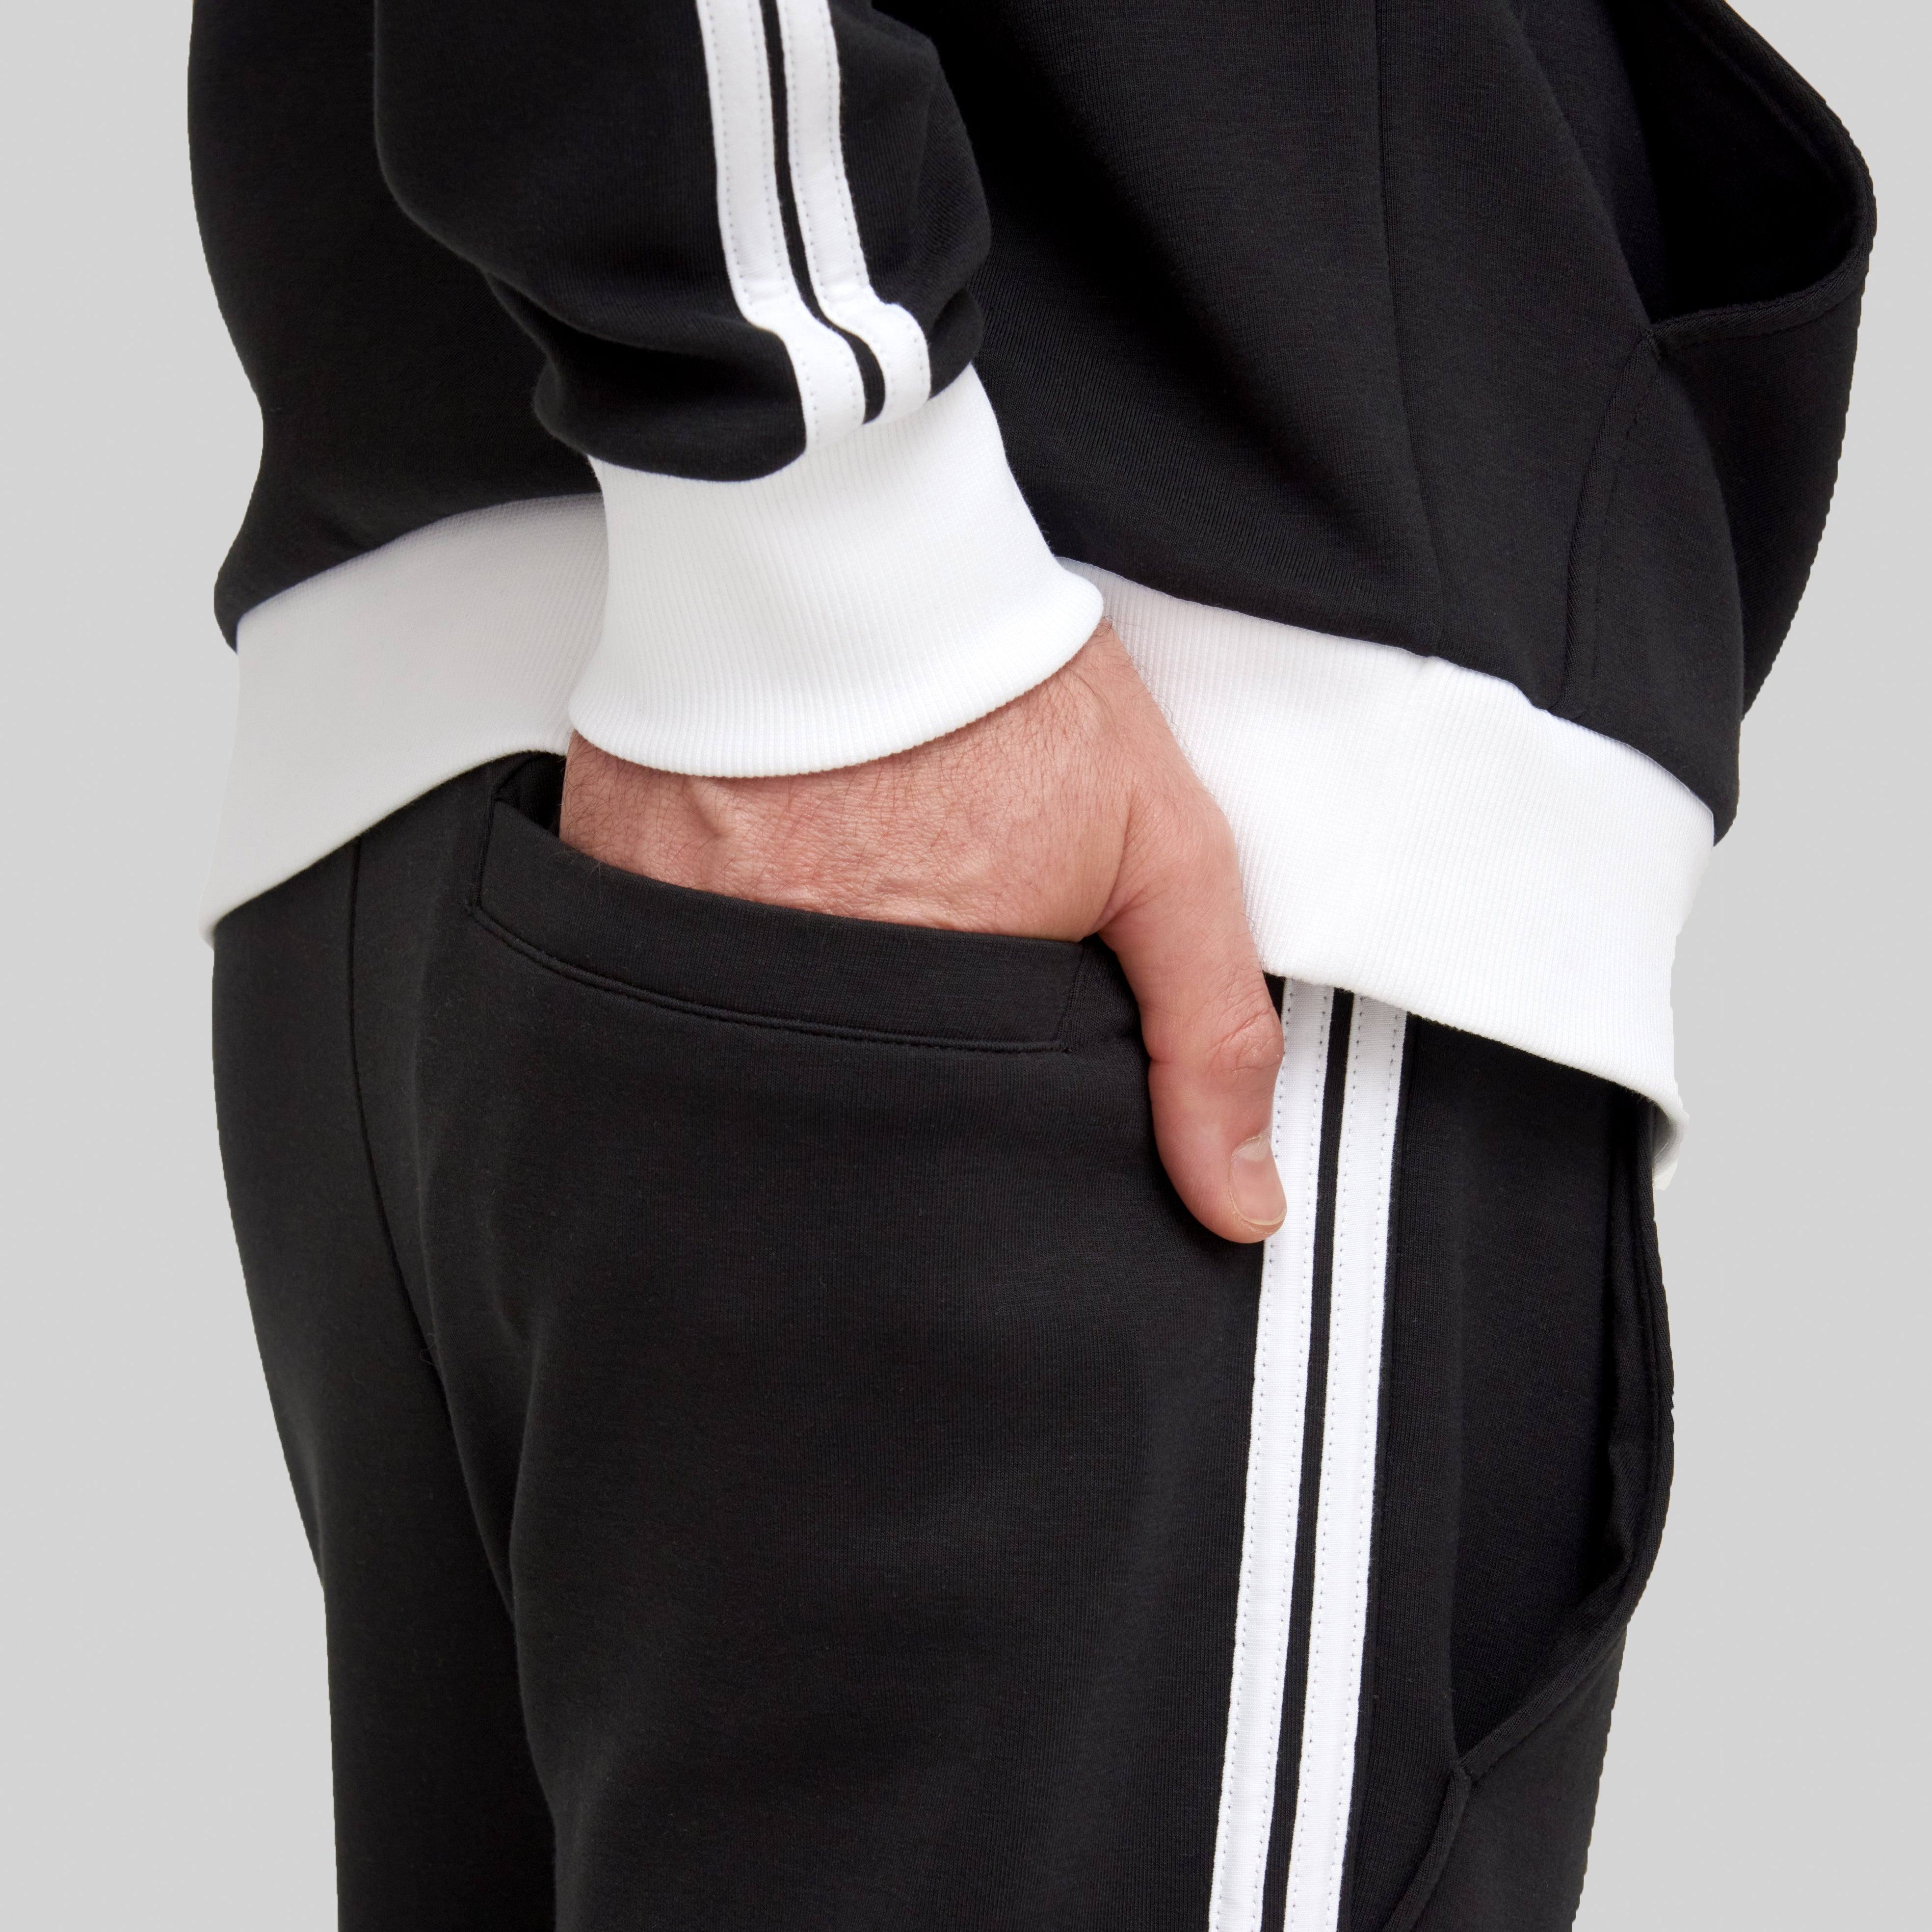 TAIGETO BLACK SPORT TROUSERS | Monastery Couture